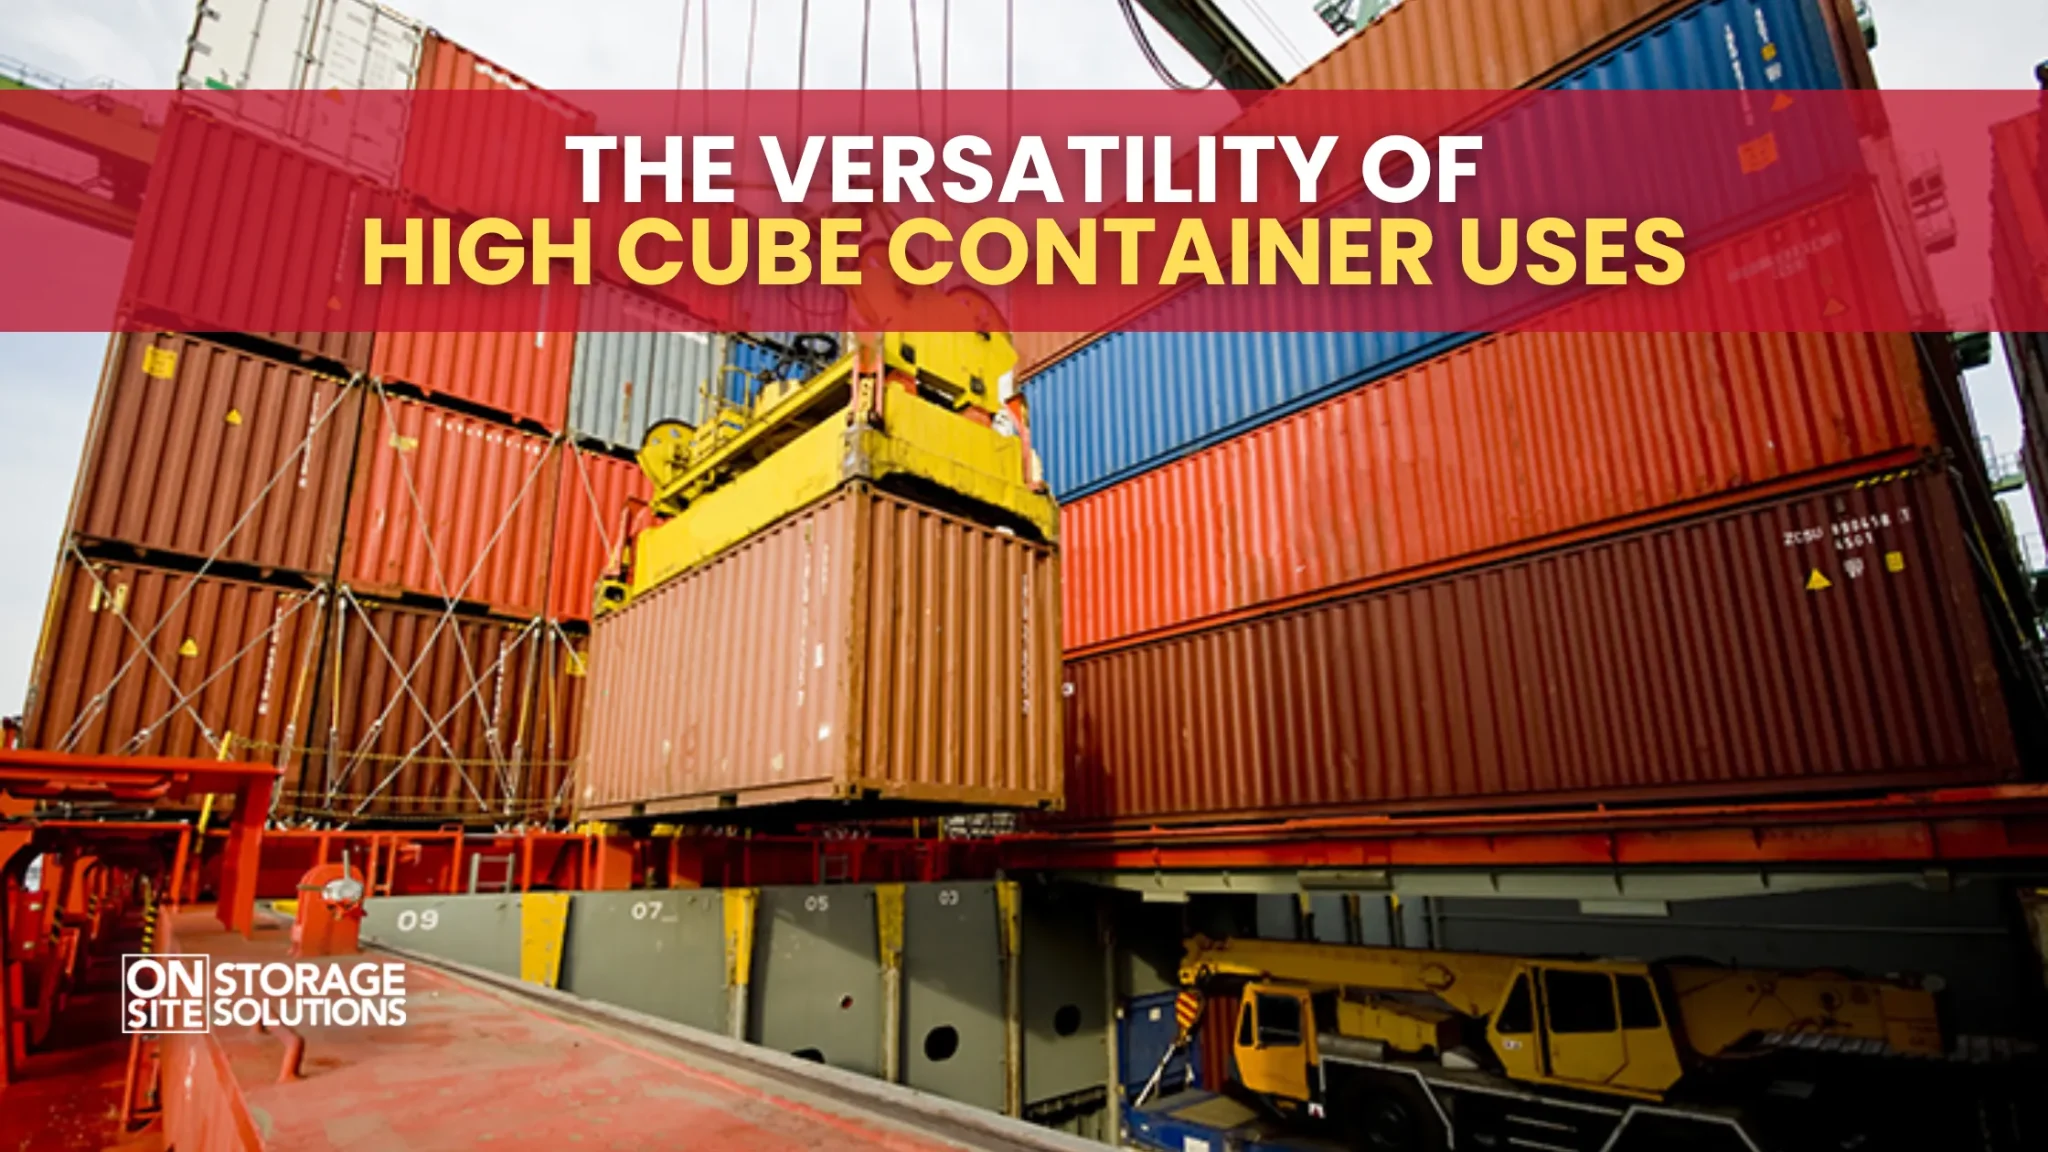 The Versatility of High Cube Container Uses